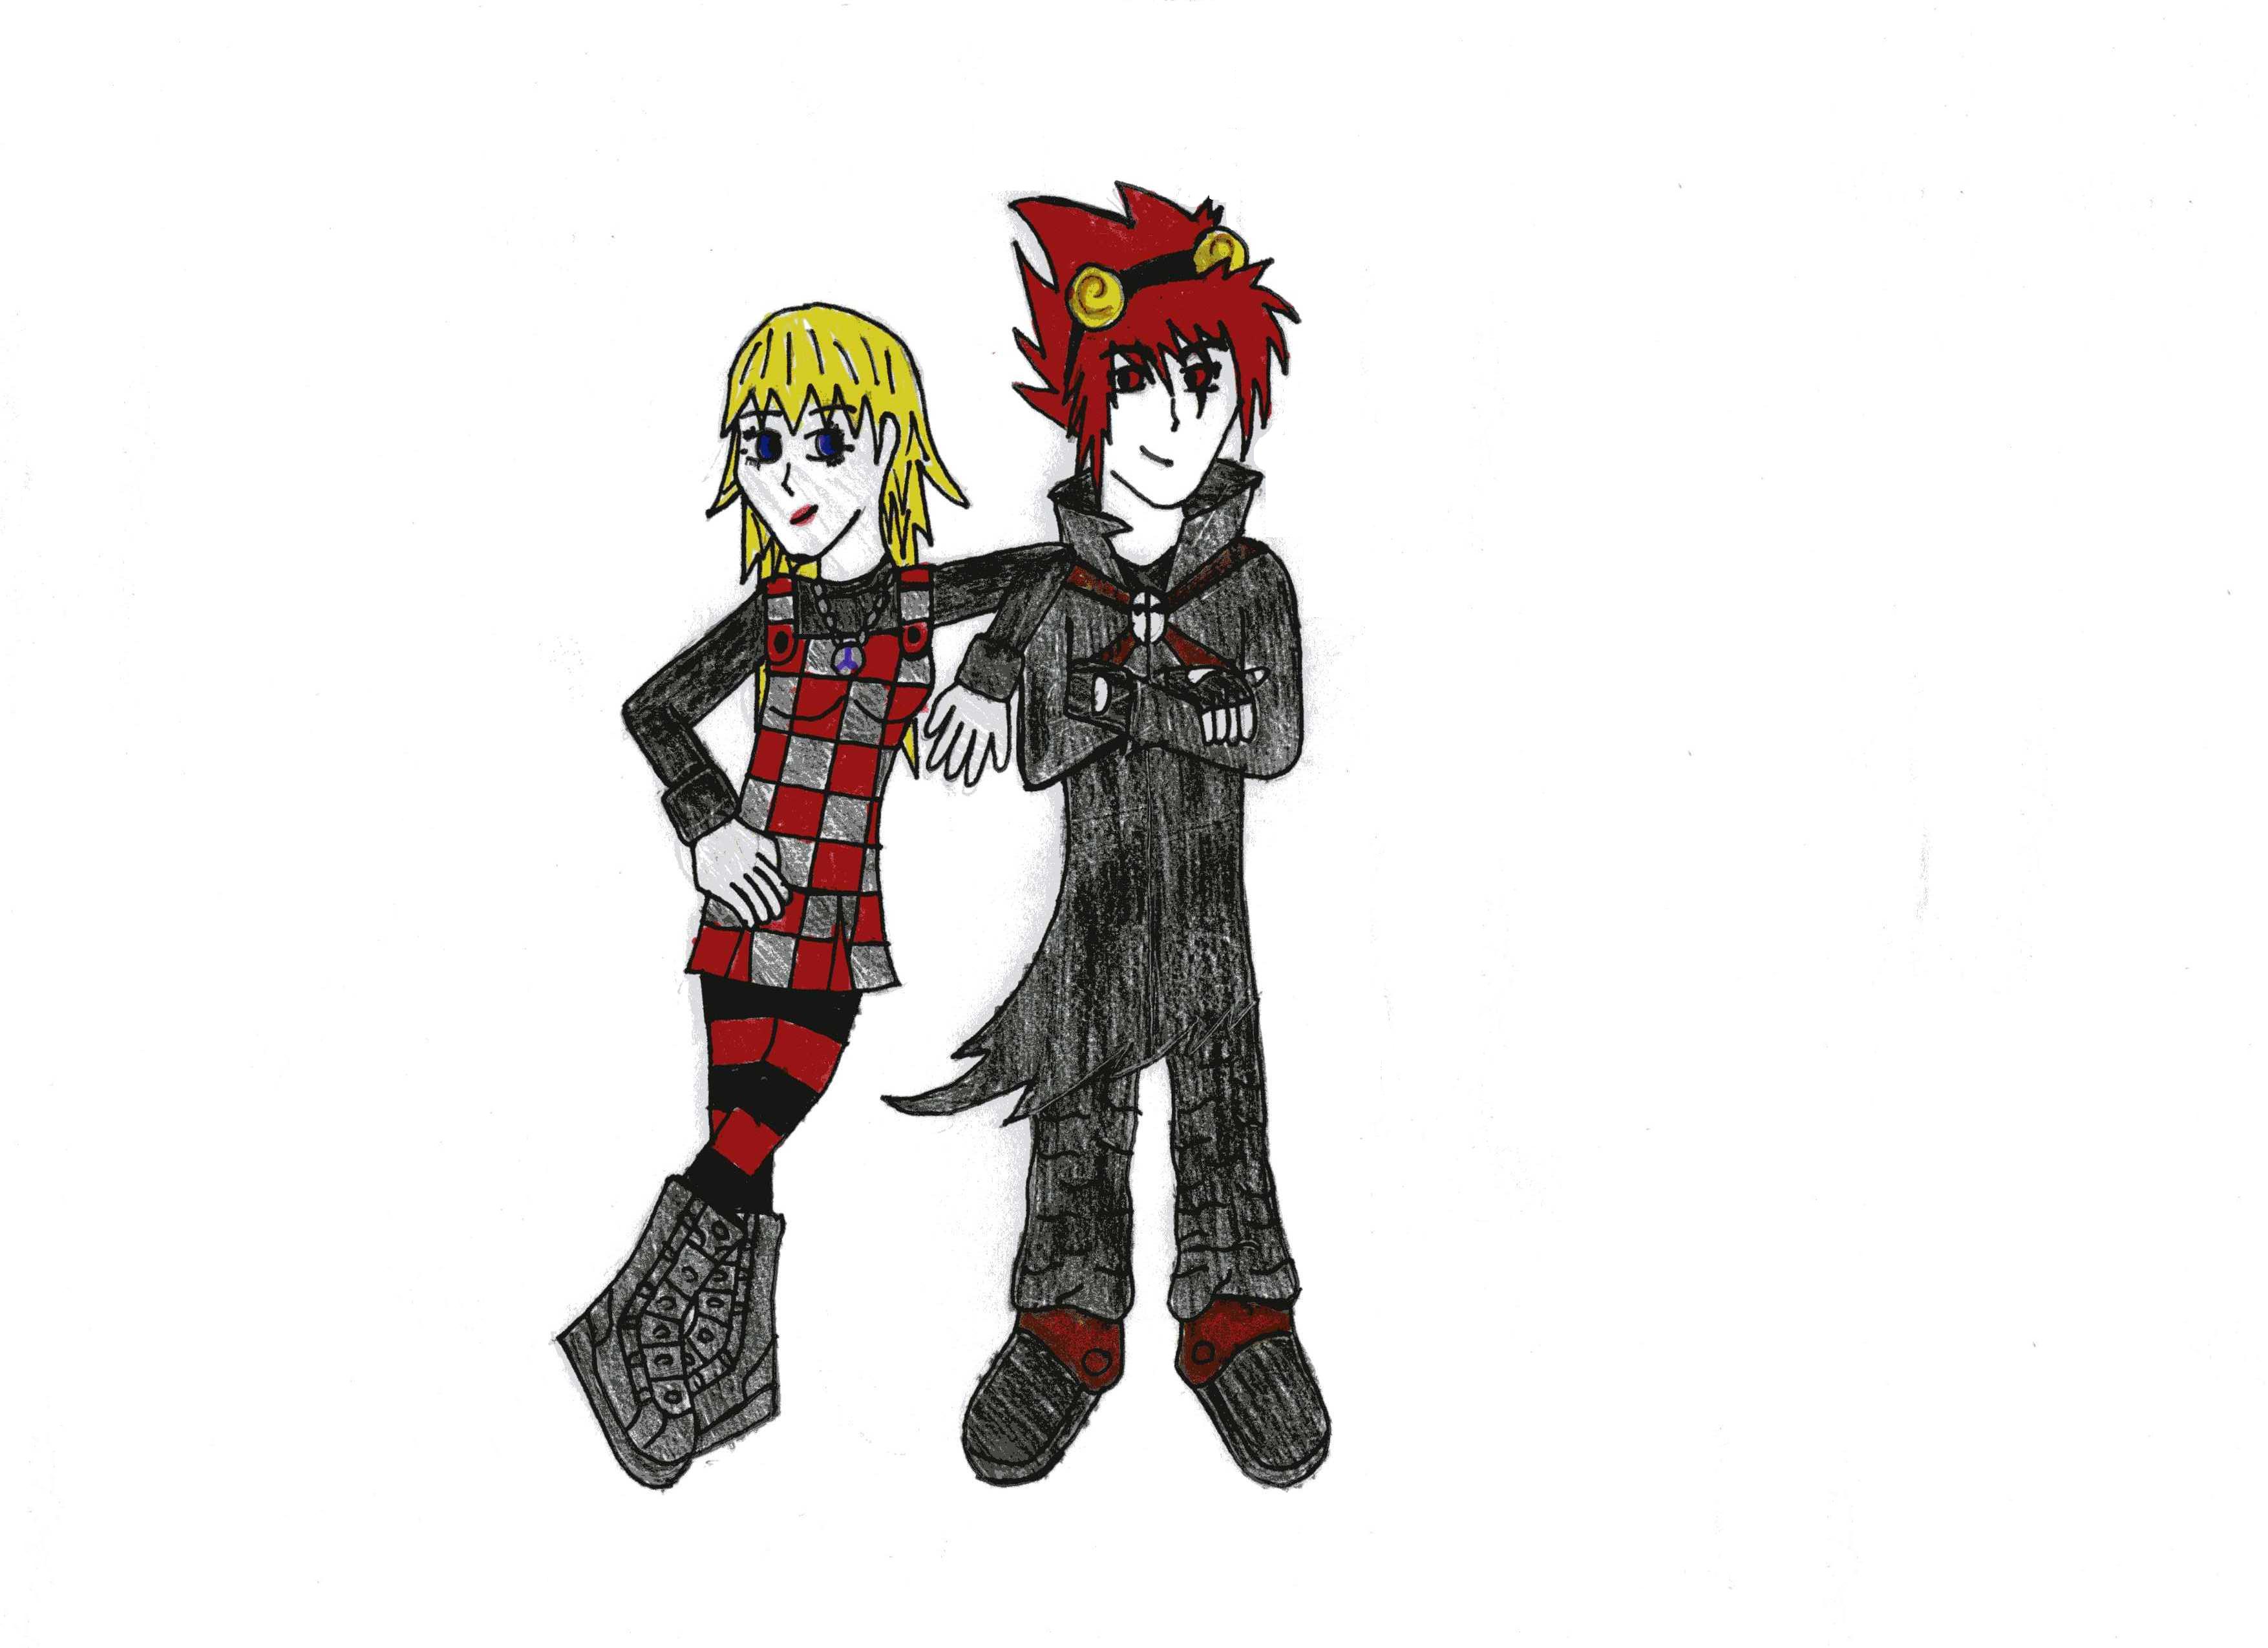 Me &amp; jack by MidnightDarkness666